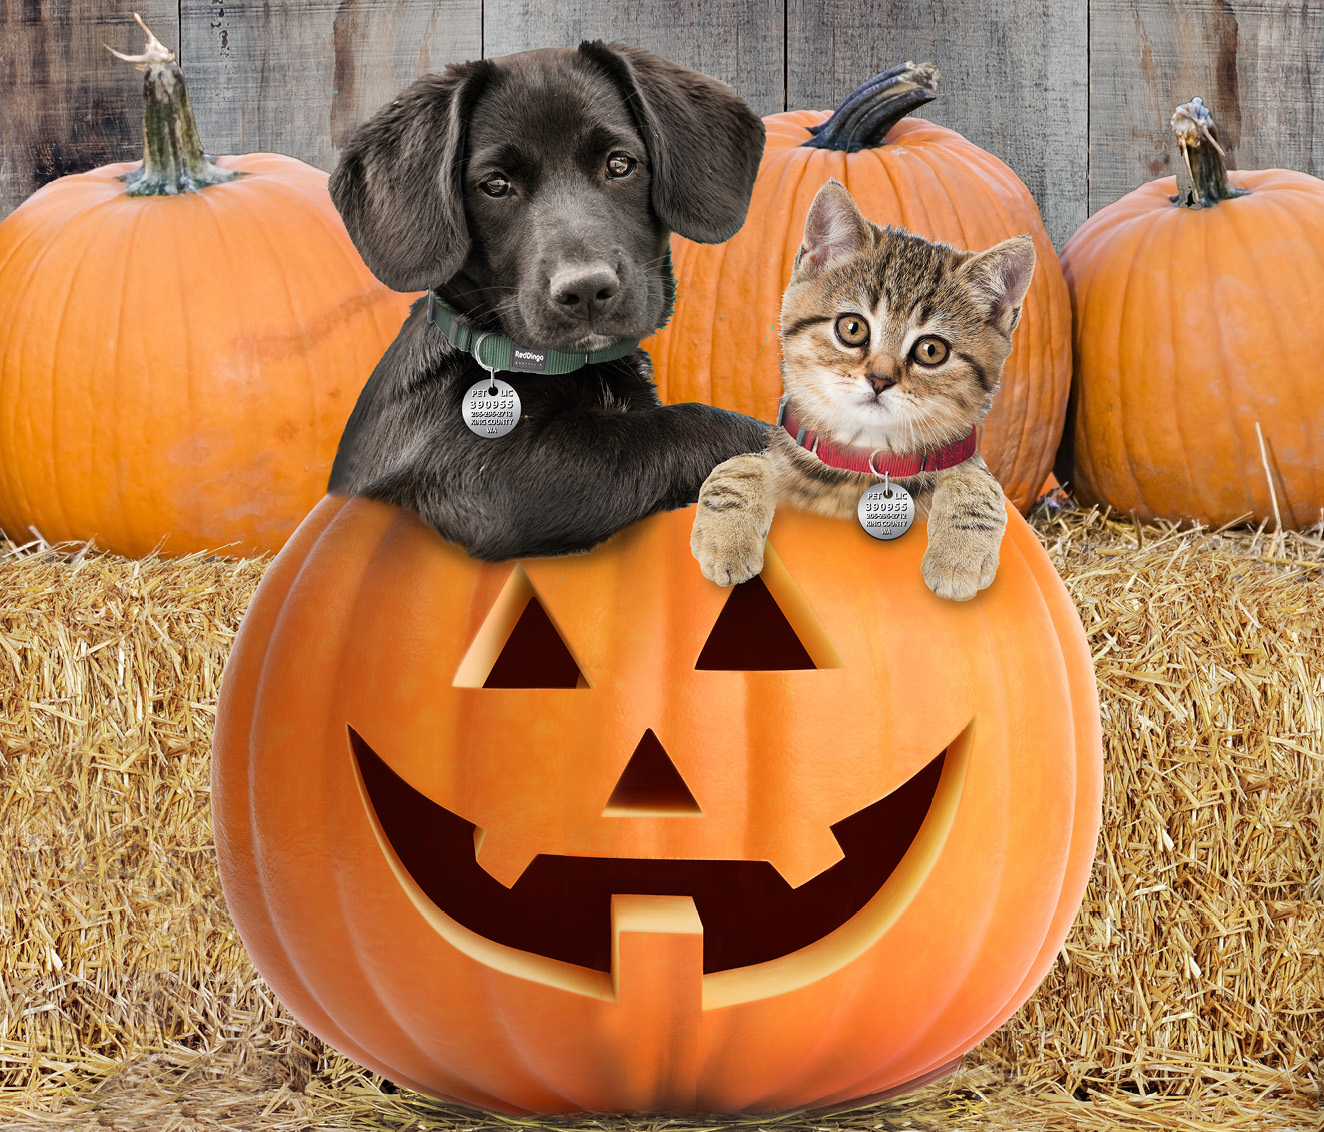 Dog and cat with pumpkins